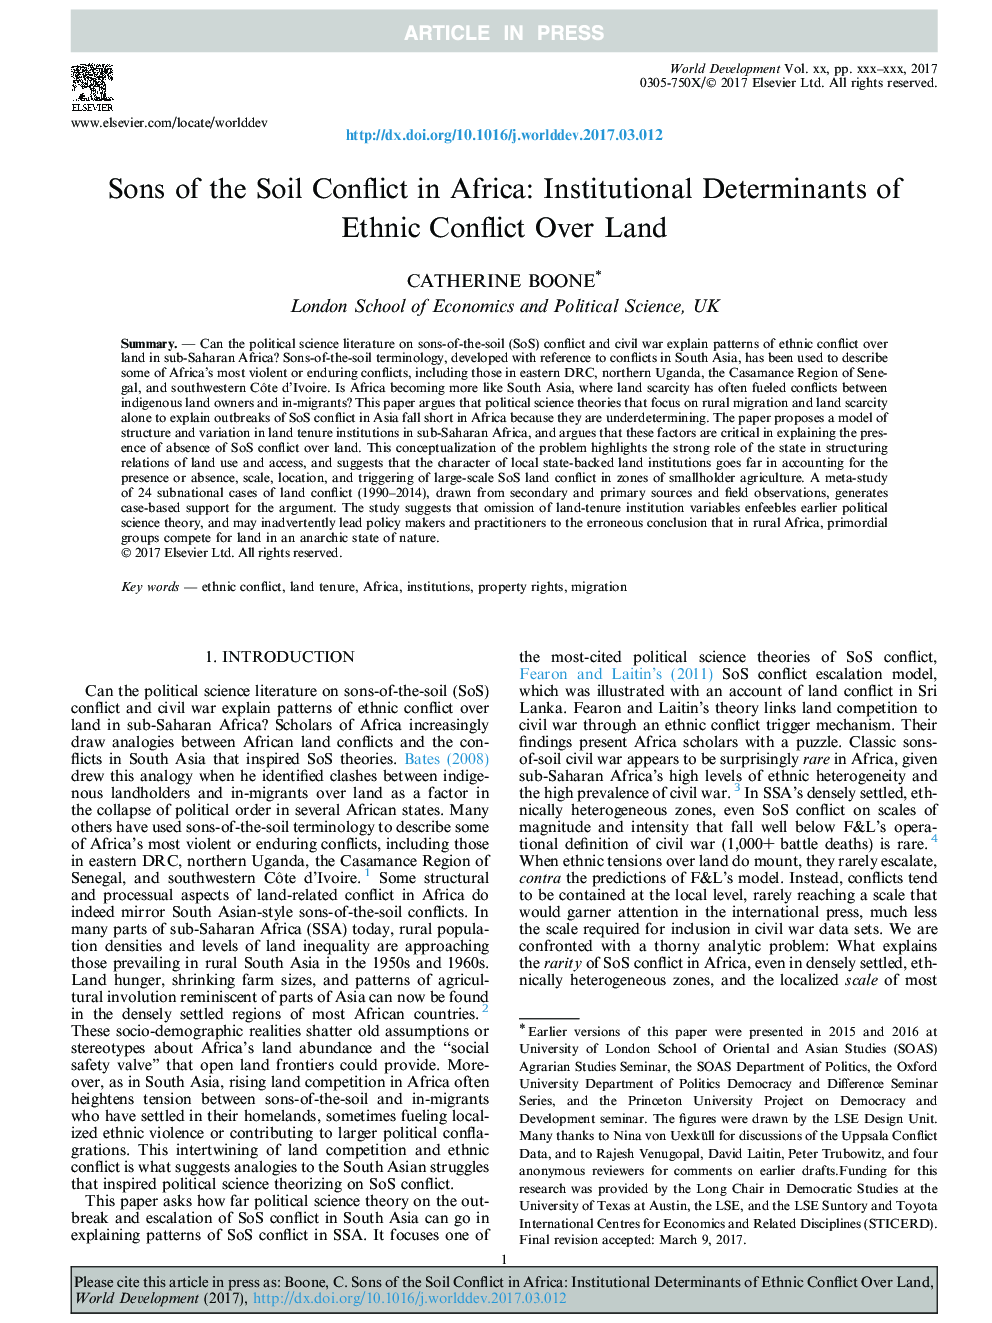 Sons of the Soil Conflict in Africa: Institutional Determinants of Ethnic Conflict Over Land